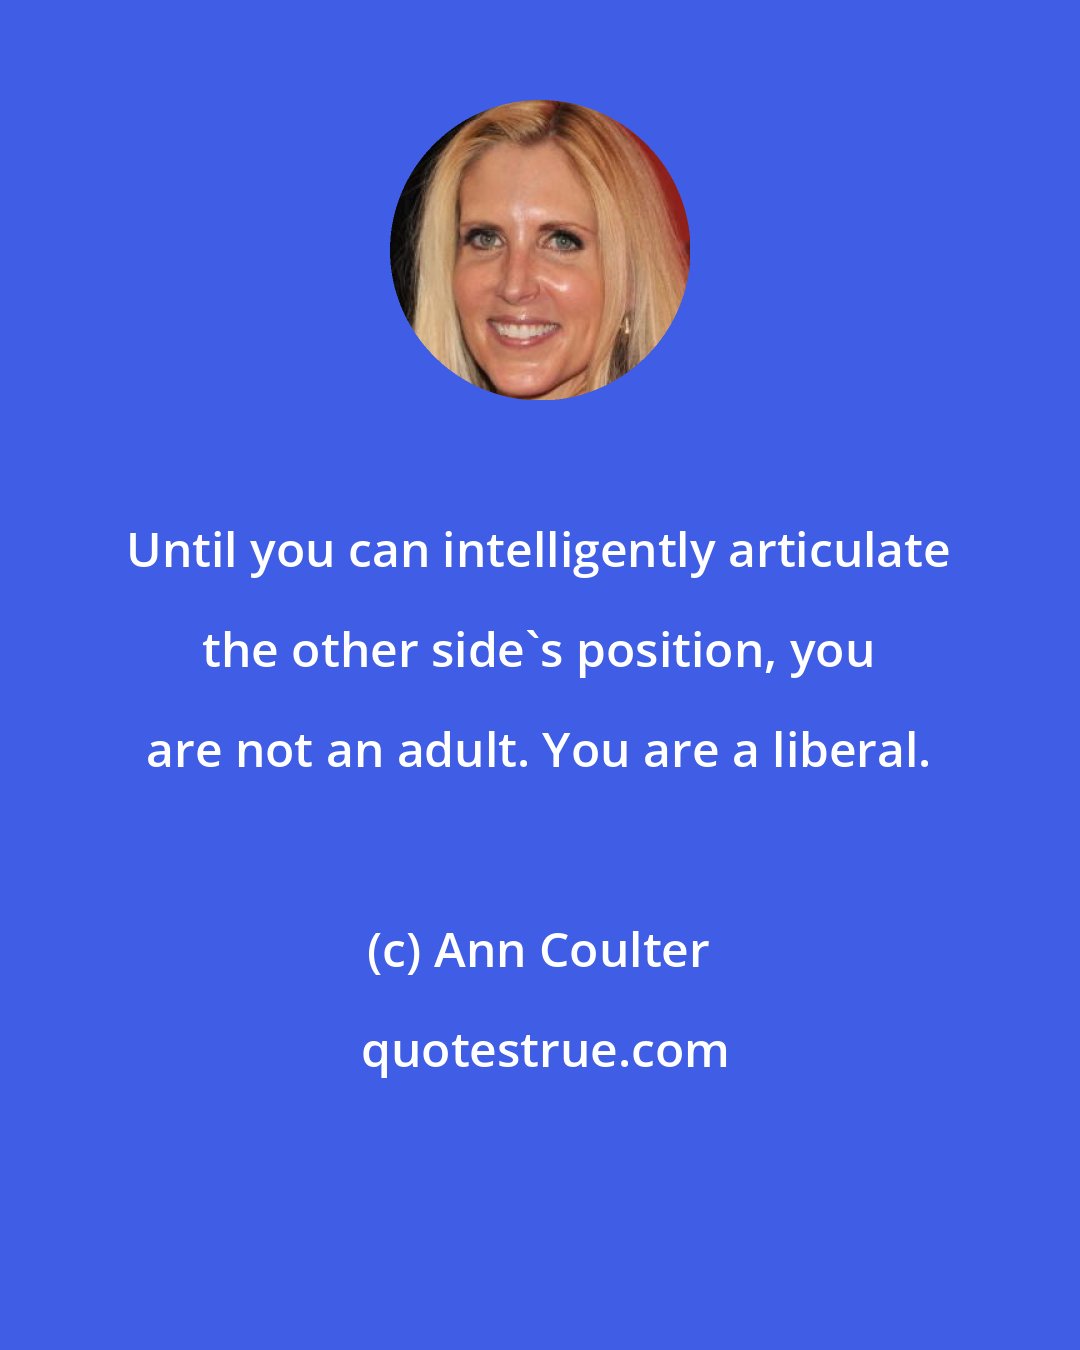 Ann Coulter: Until you can intelligently articulate the other side's position, you are not an adult. You are a liberal.